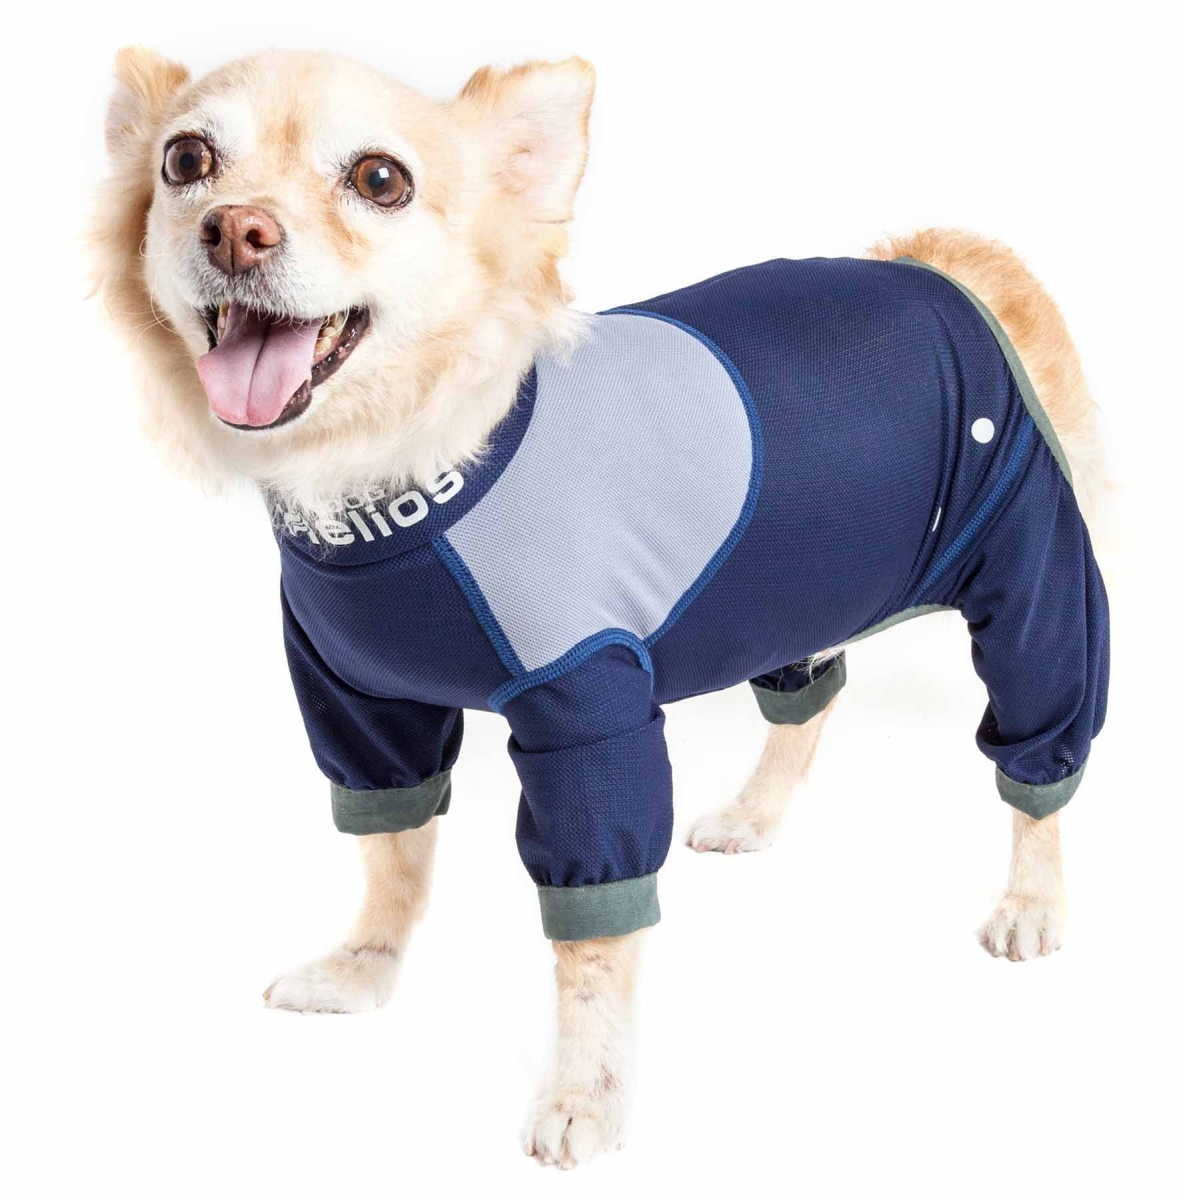 Yghl9blsm Tail Runner 4-way-stretch Breathable Full Bodied Performance Dog Track Suit - Blue & Grey, Small